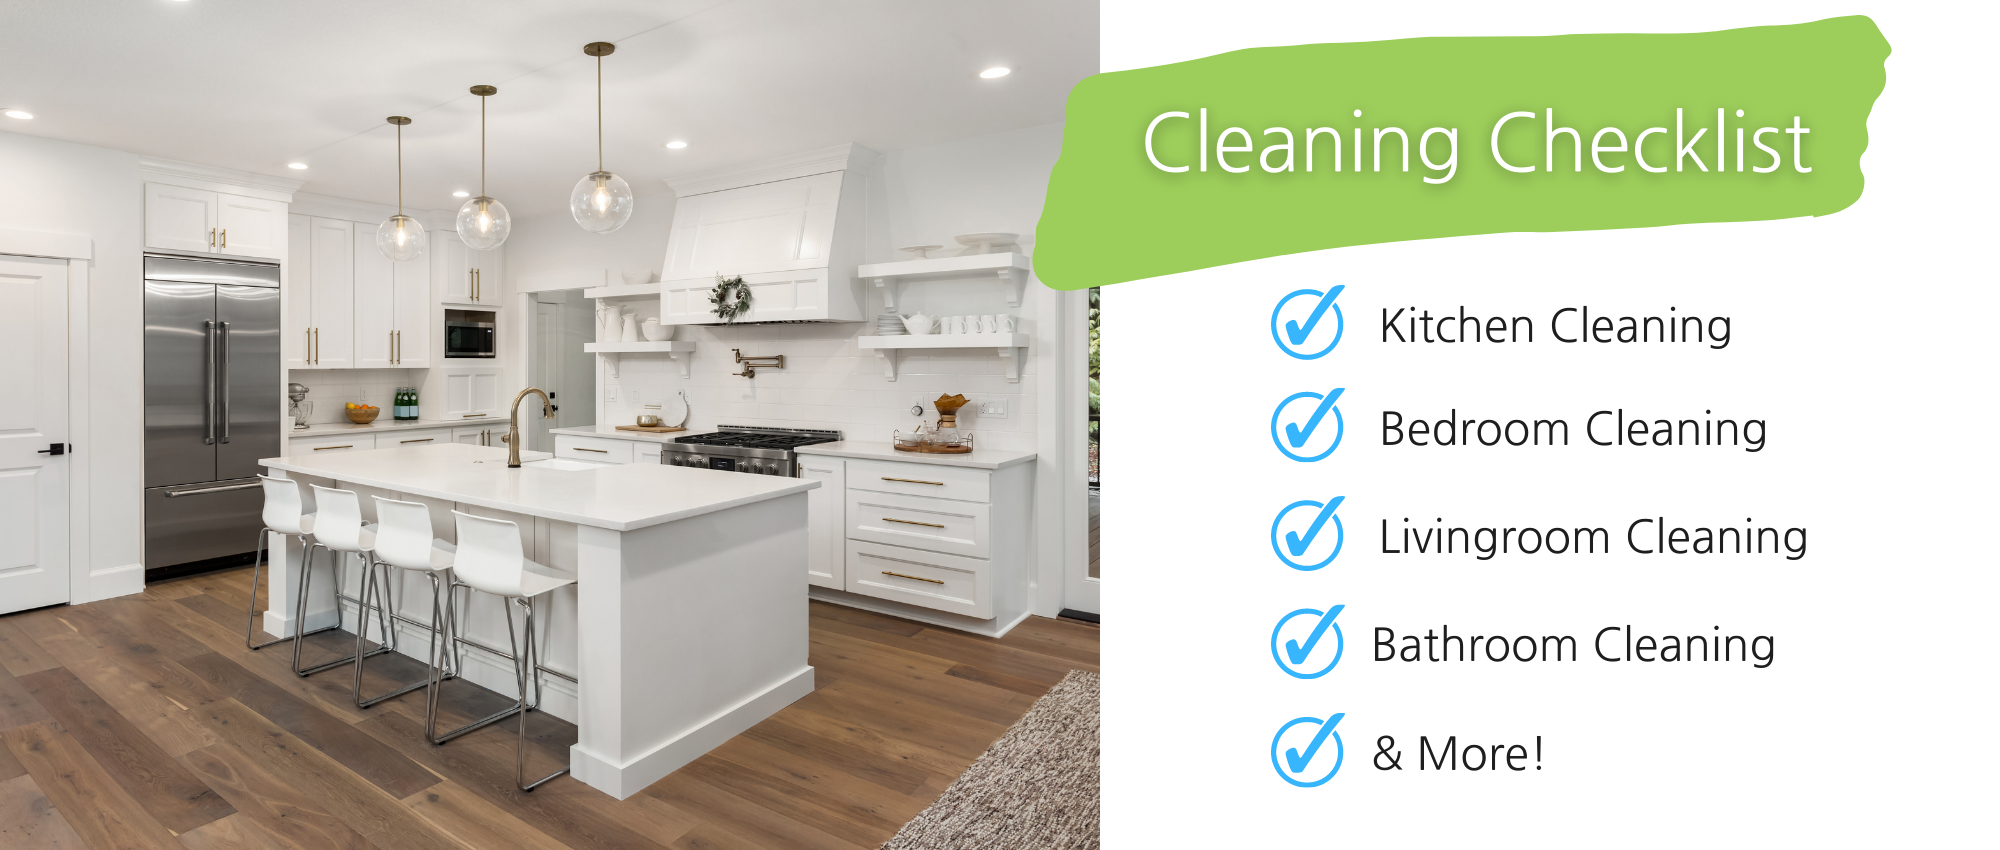 Cleaning checklist 